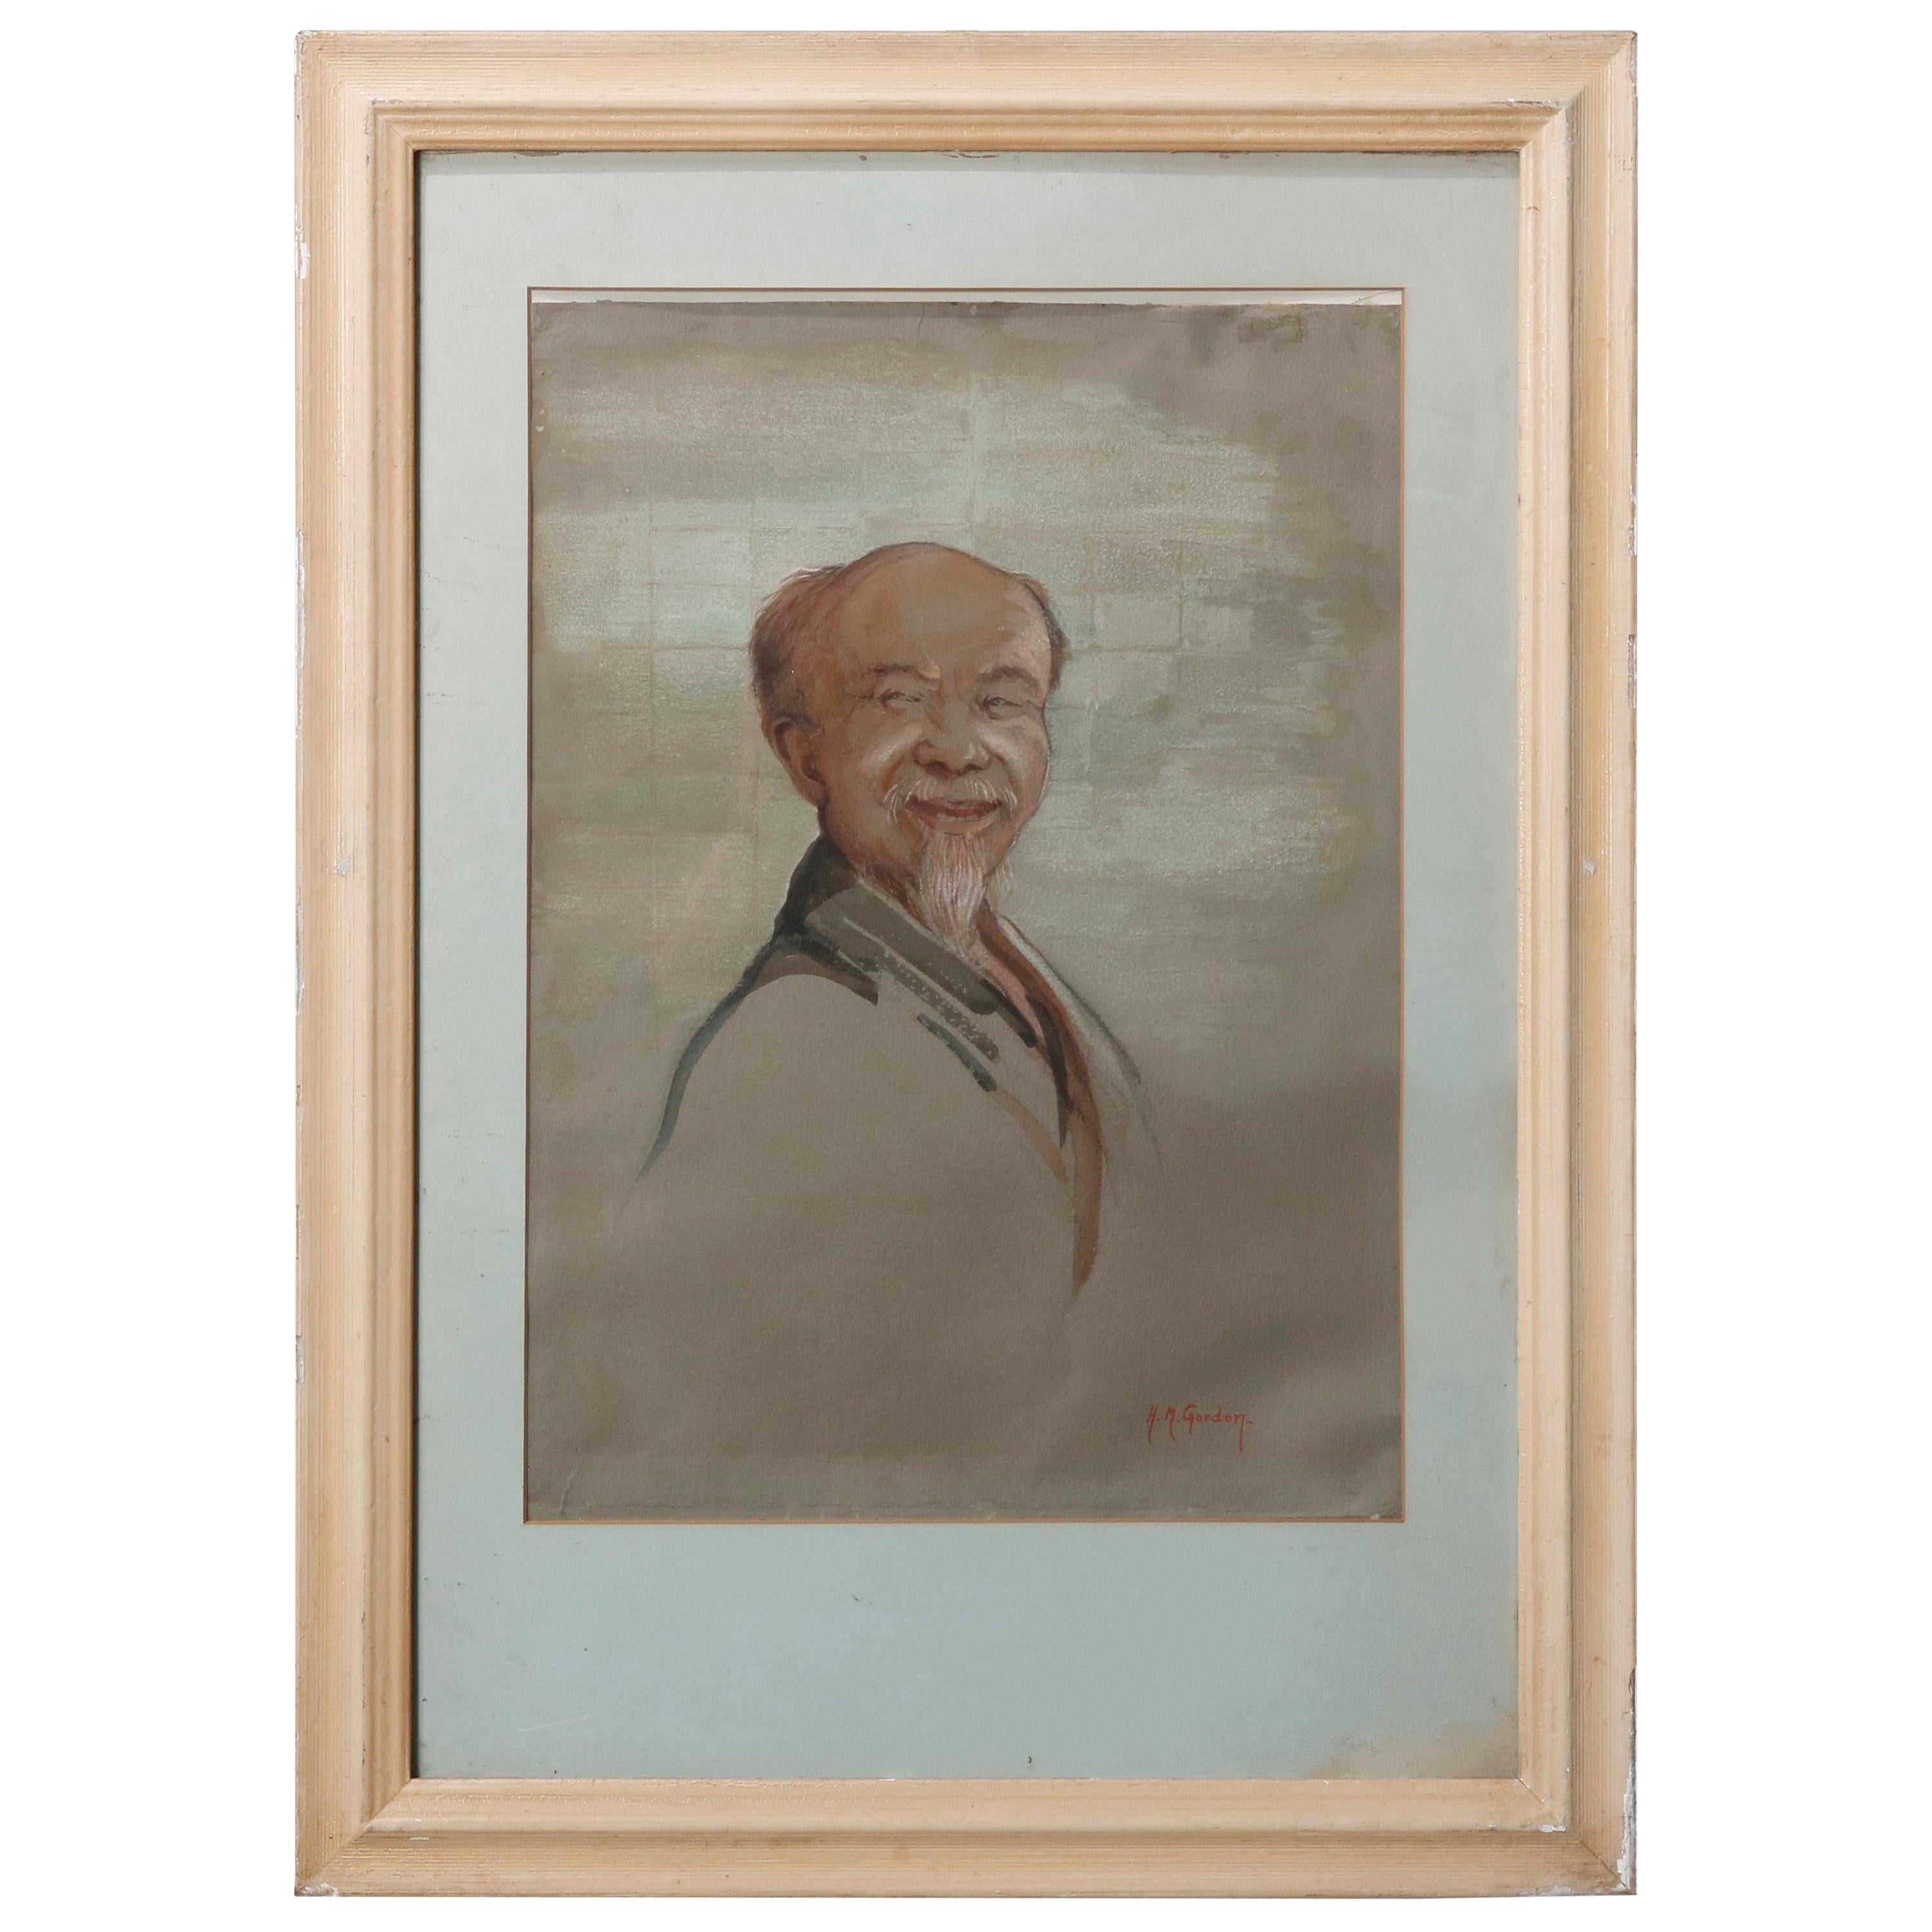 Antique Oil on Canvas Portrait Painting of a Wise Man by HM Gordon, circa 1930